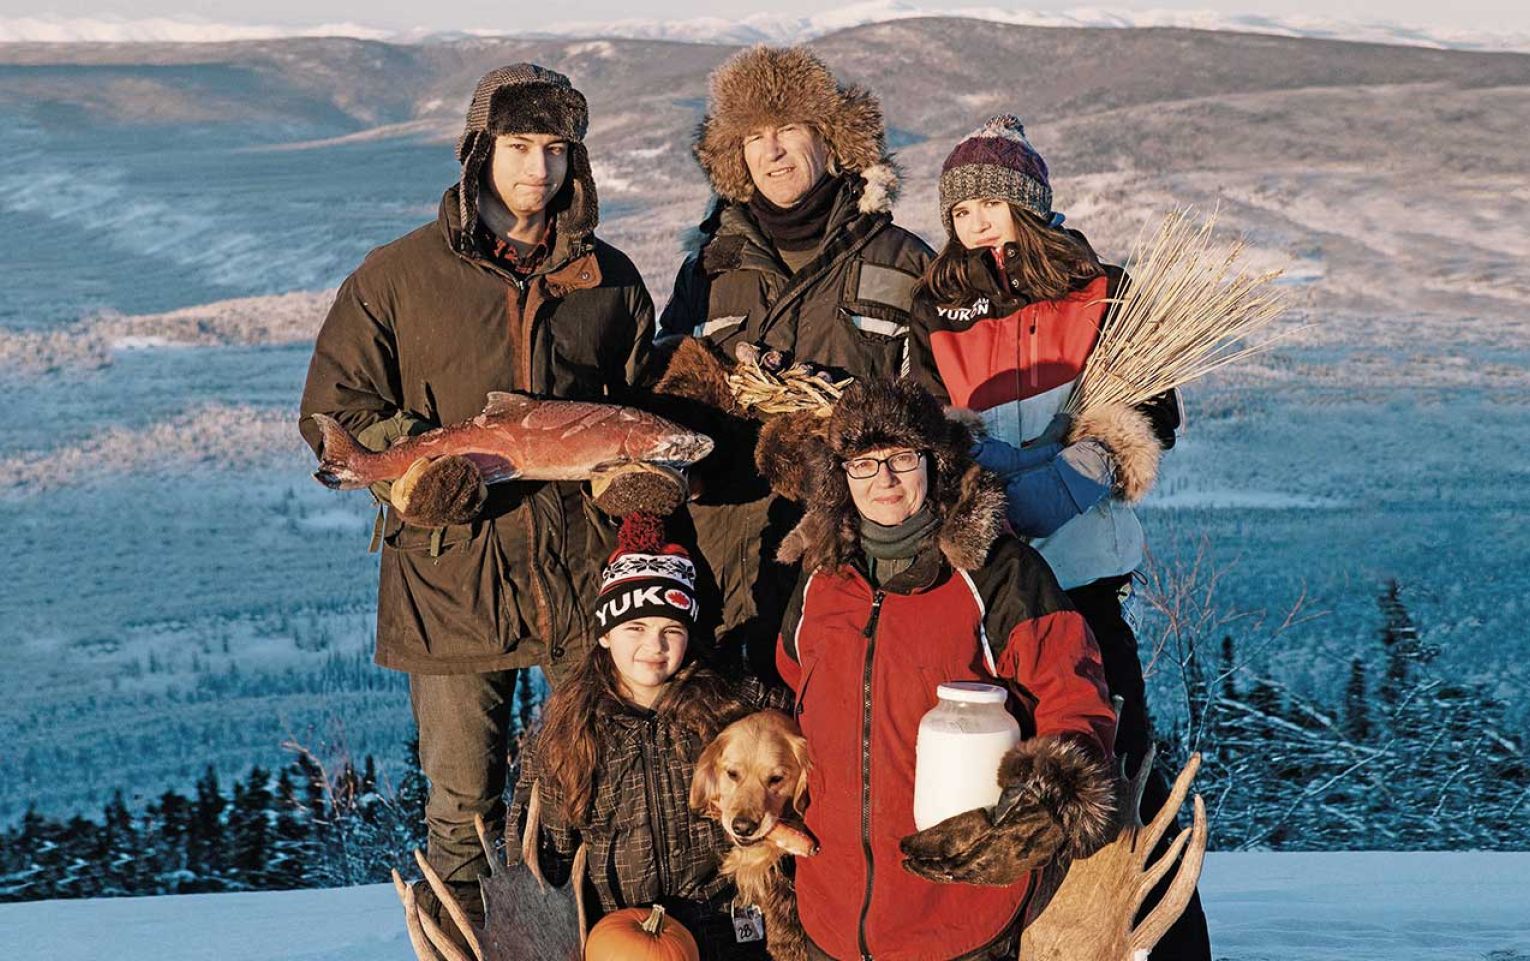 Suzanne Crocker and her family outside on a mountain in winter 